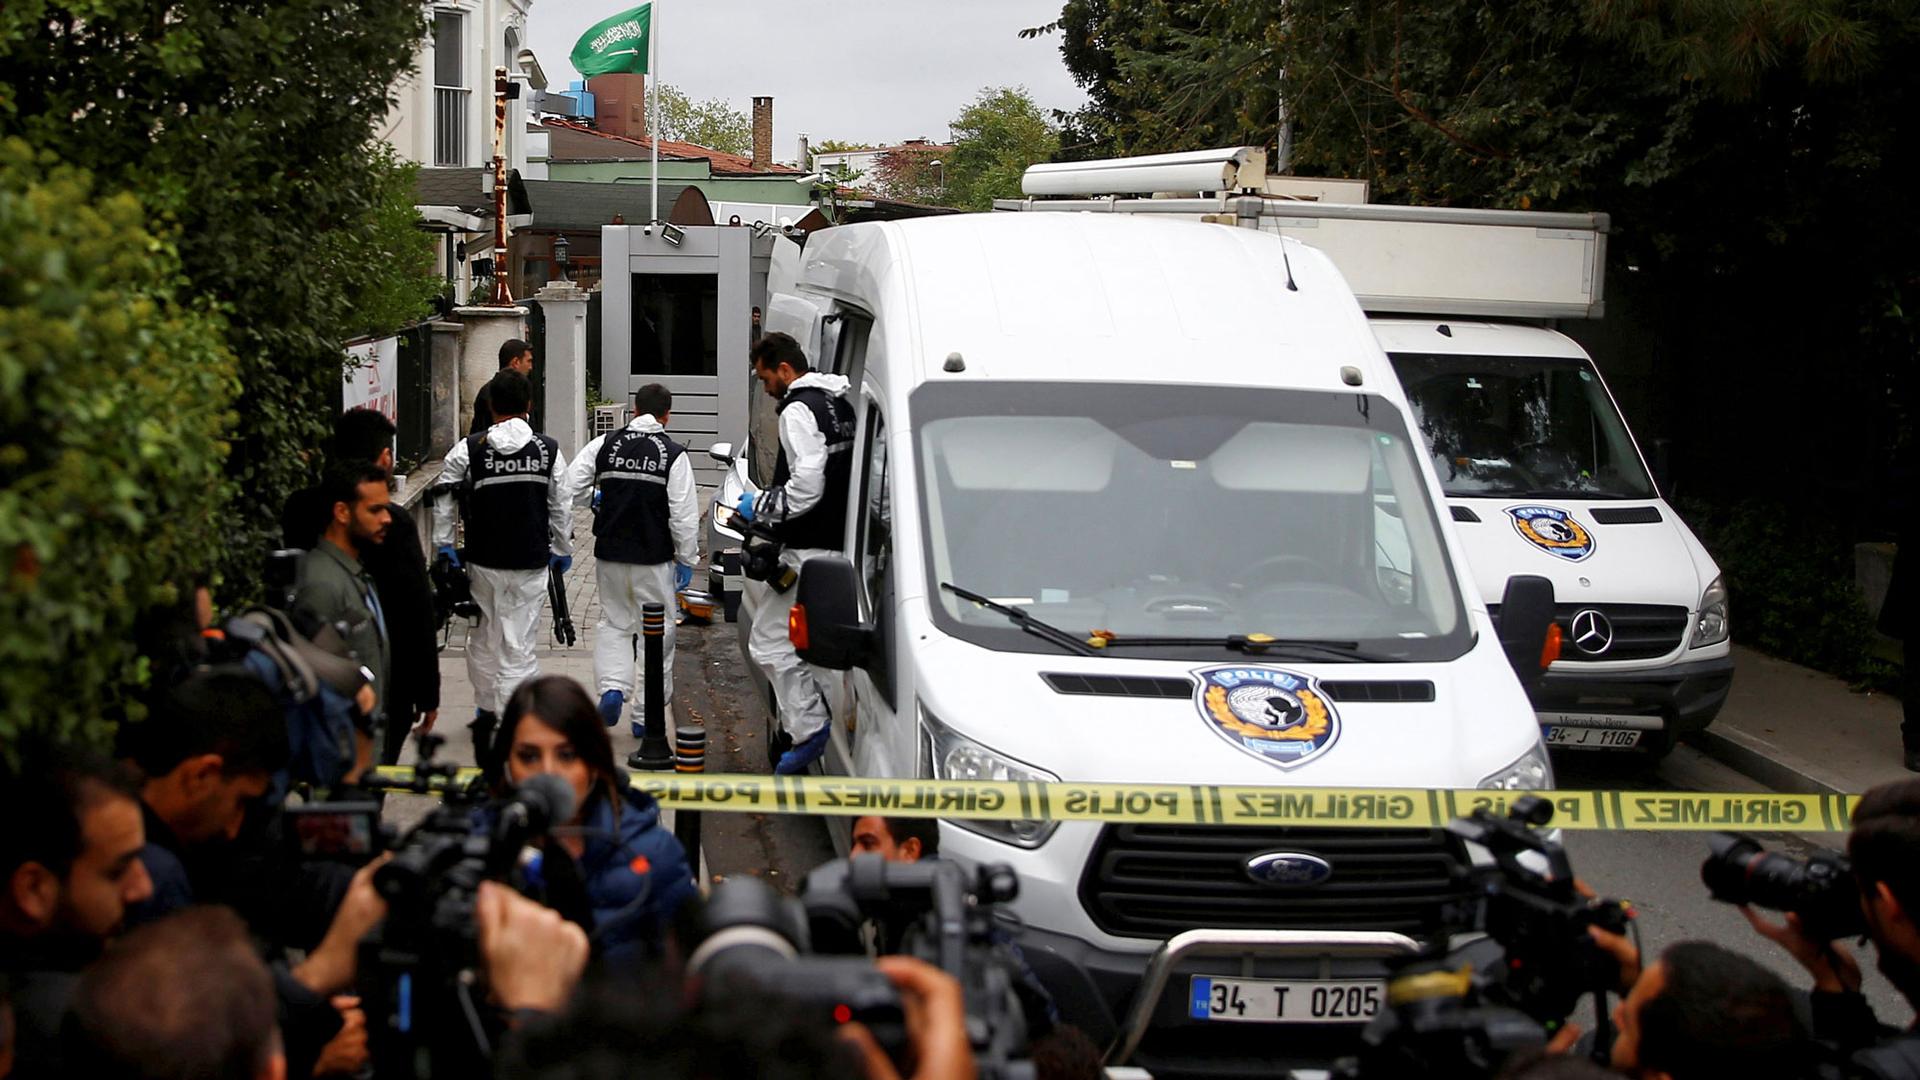 Turkish forensic officials arrive clad in white uniforms and a white van to the residence of Saudi Arabia's Consul General Mohammad al-Otaibi in Istanbul, Turkey.